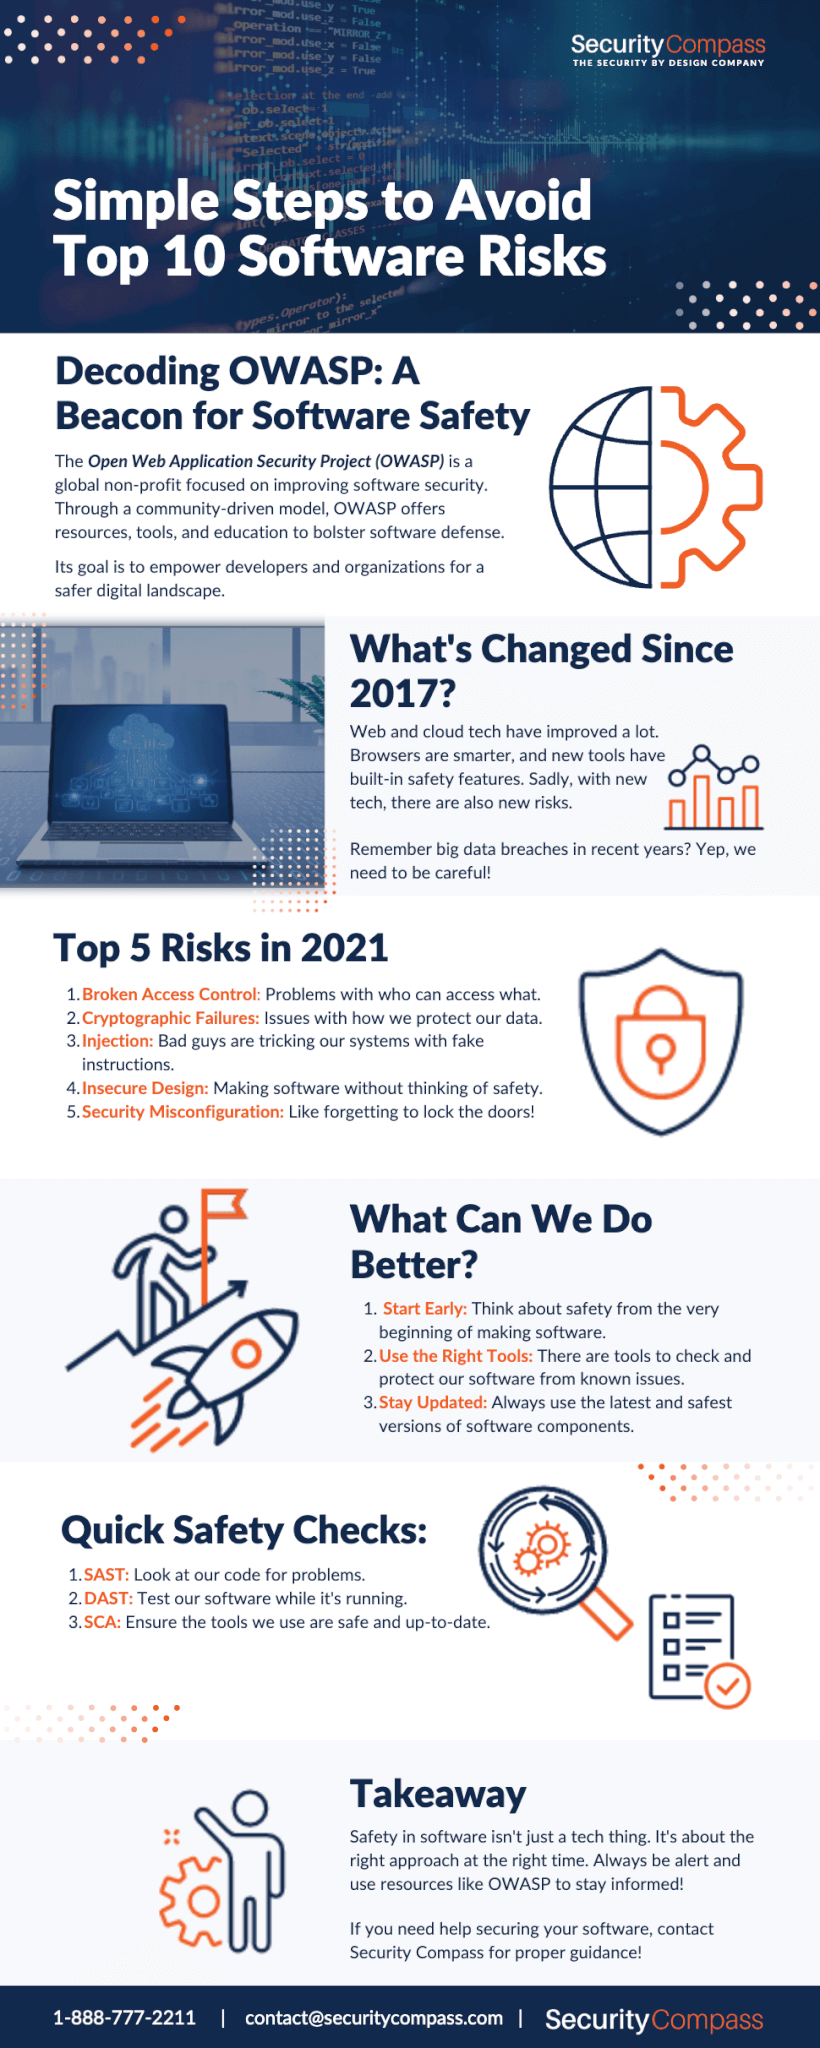 Infographic showing the Simple Steps to AvoidTop 10 Software Risks Decoding OWASP: A Beacon for Software Safety. It explores Top 5 Cyber security Risks in 2021 and provides a simple checklist to avoid these security risks